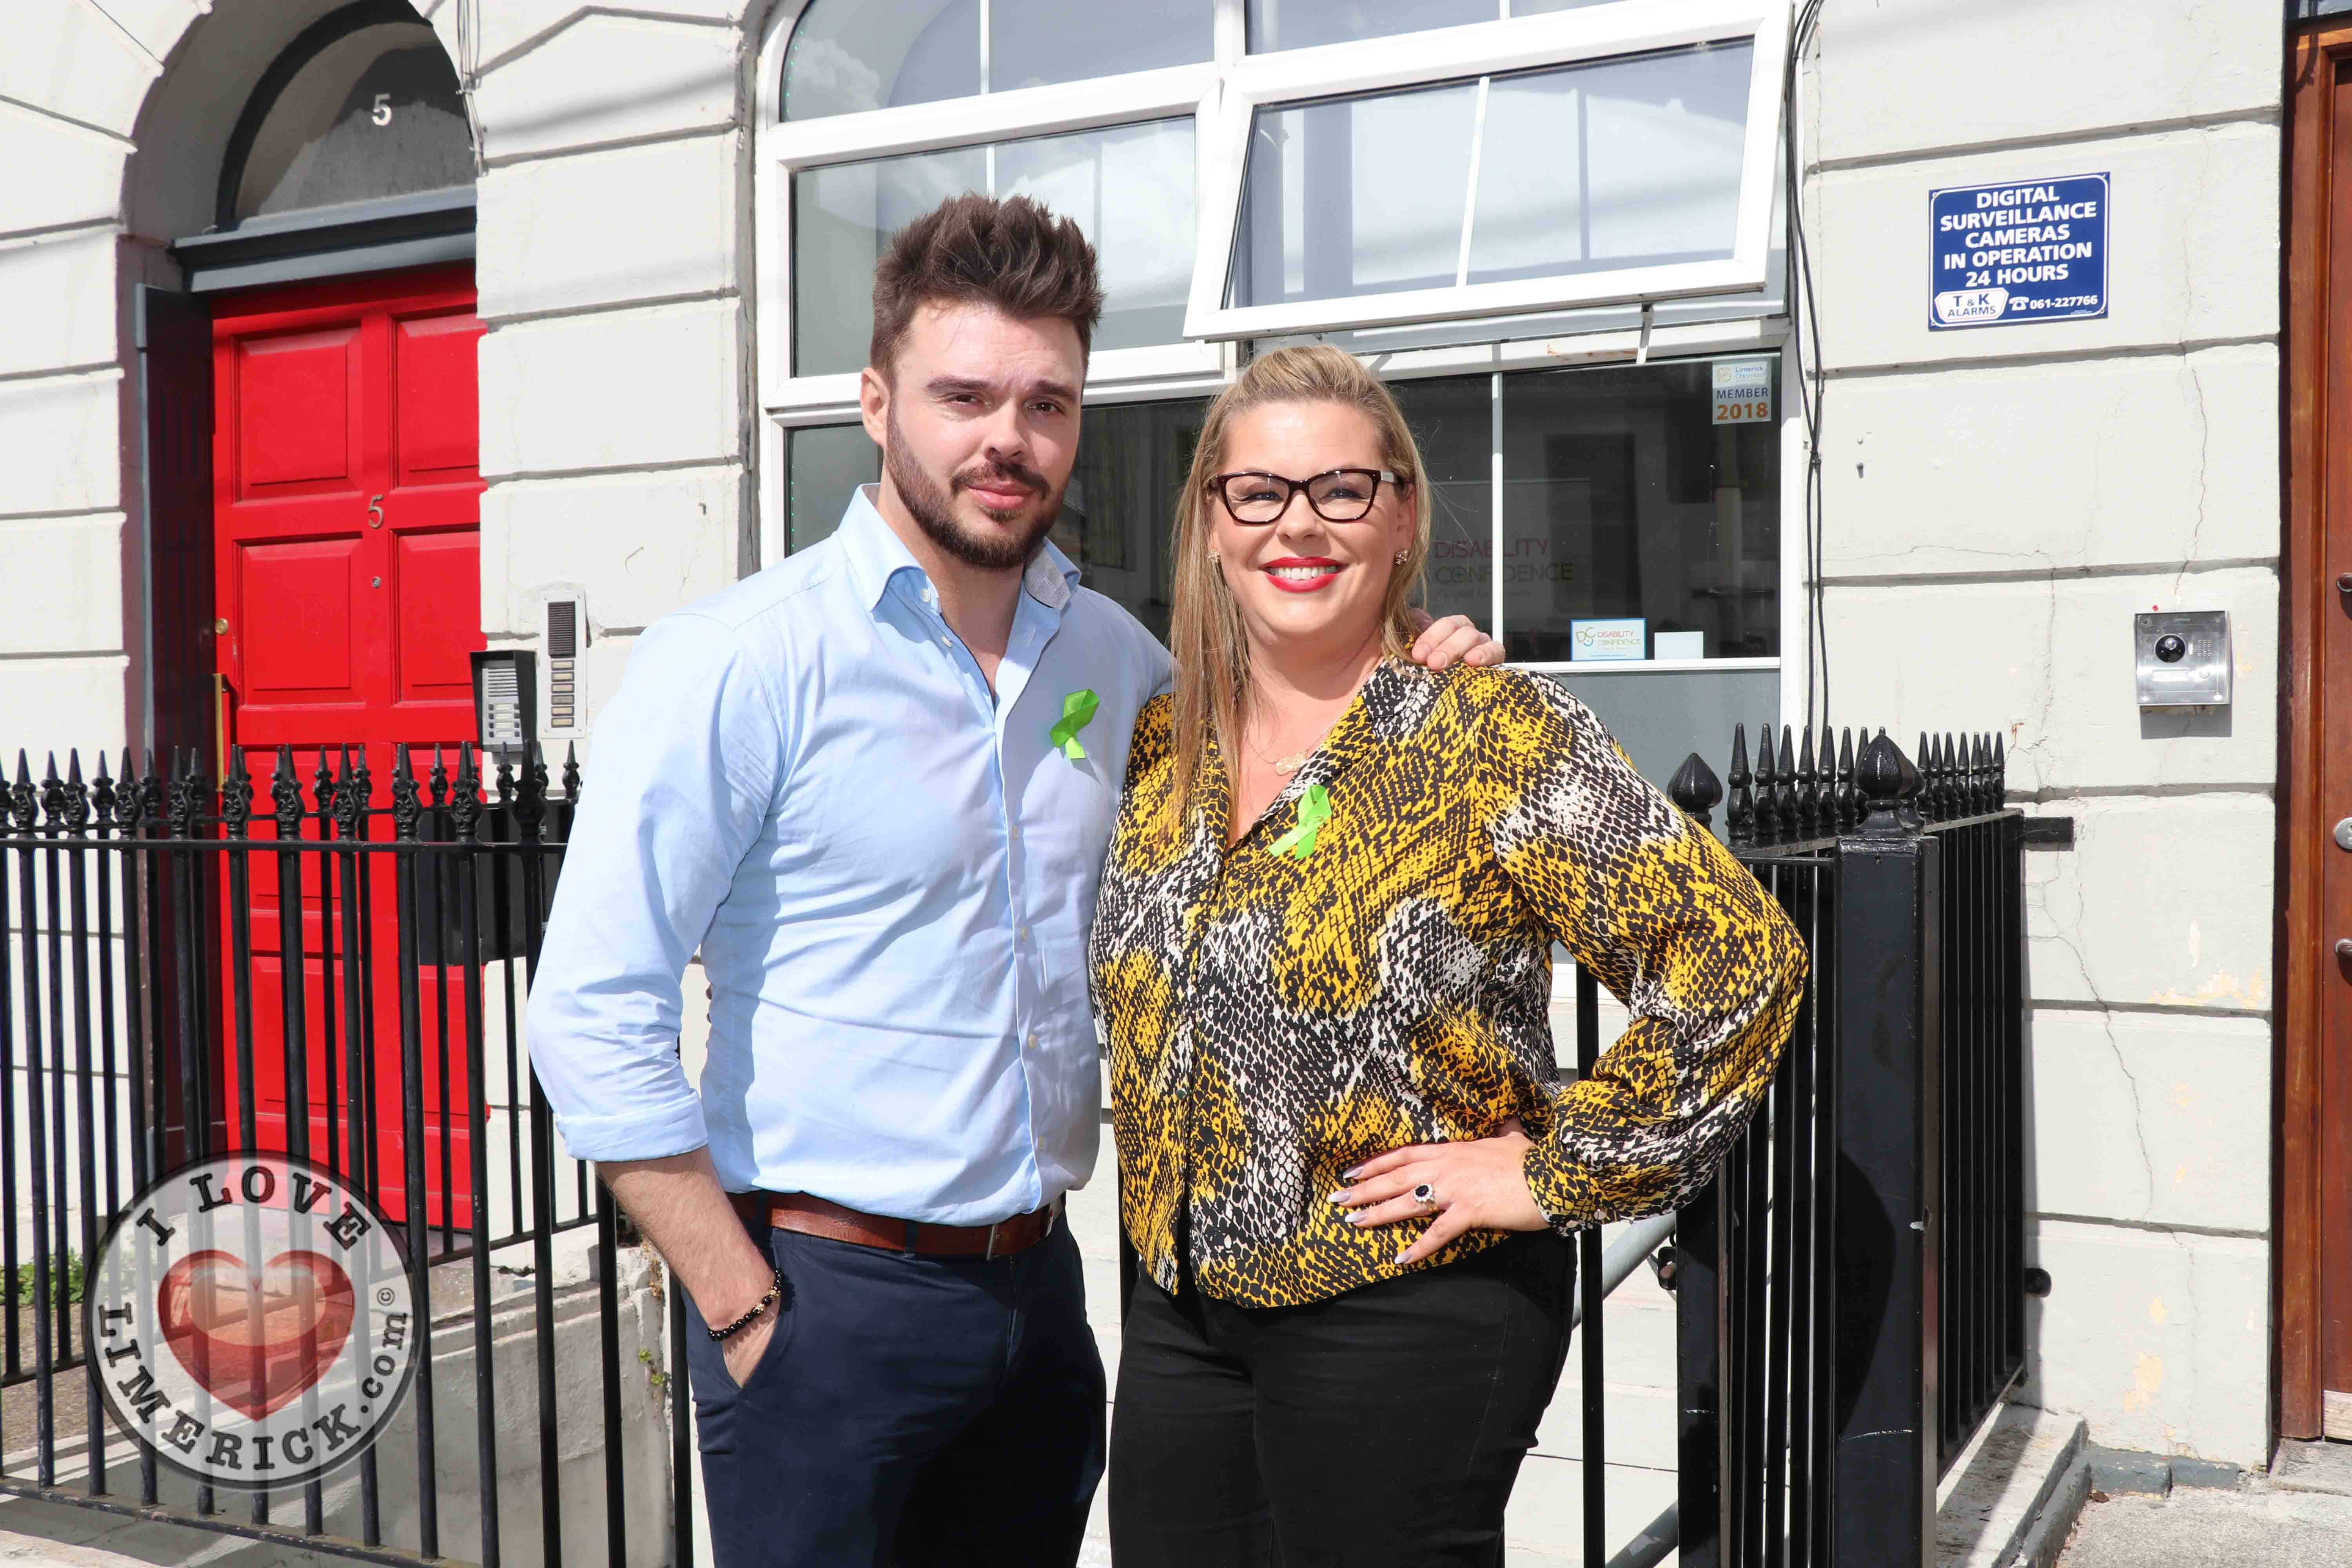 Pictured at the EmployAbility Limerick Office for the launch of the upcoming Green Ribbon campaign and 'Time to talk' day on Tuesday May 7th are Patrick McLoughney, Social Media Influencer, Ursula Mackenzie, EmployAbility Limerick. Picture: Conor Owens/ilovelimerick.